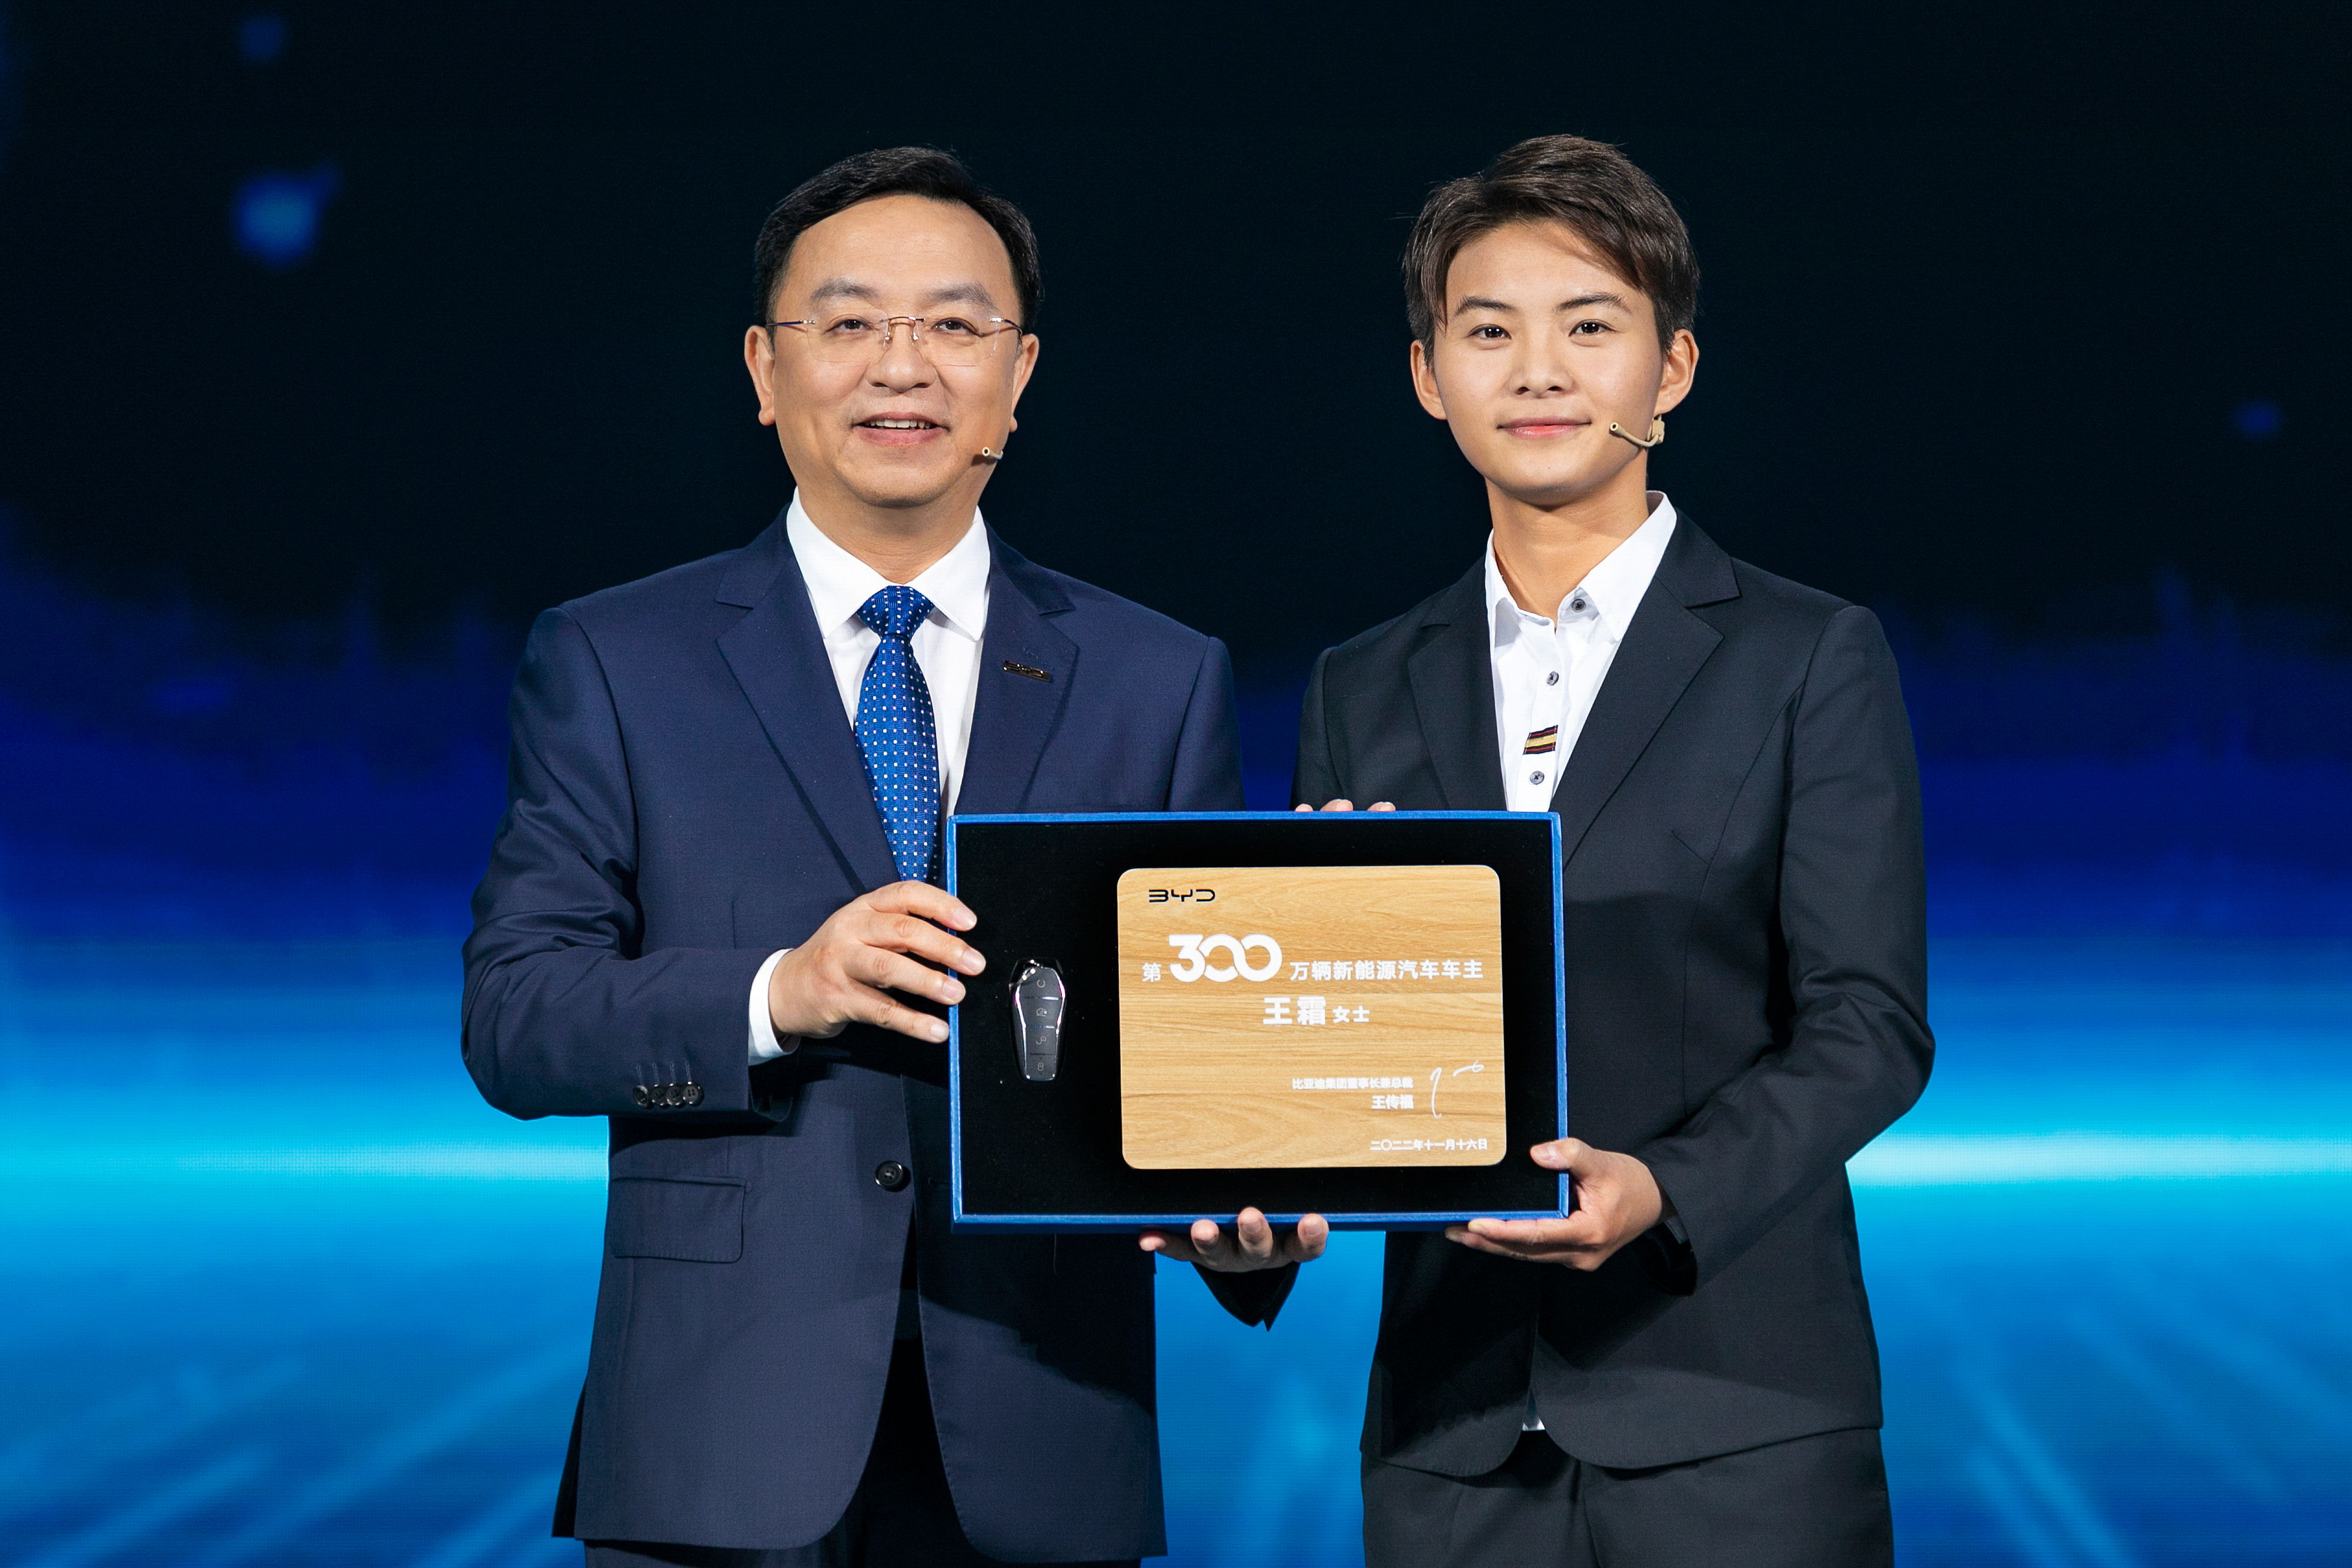 Wang Shuang became the owner of BYD's 3 millionth new energy vehicle.